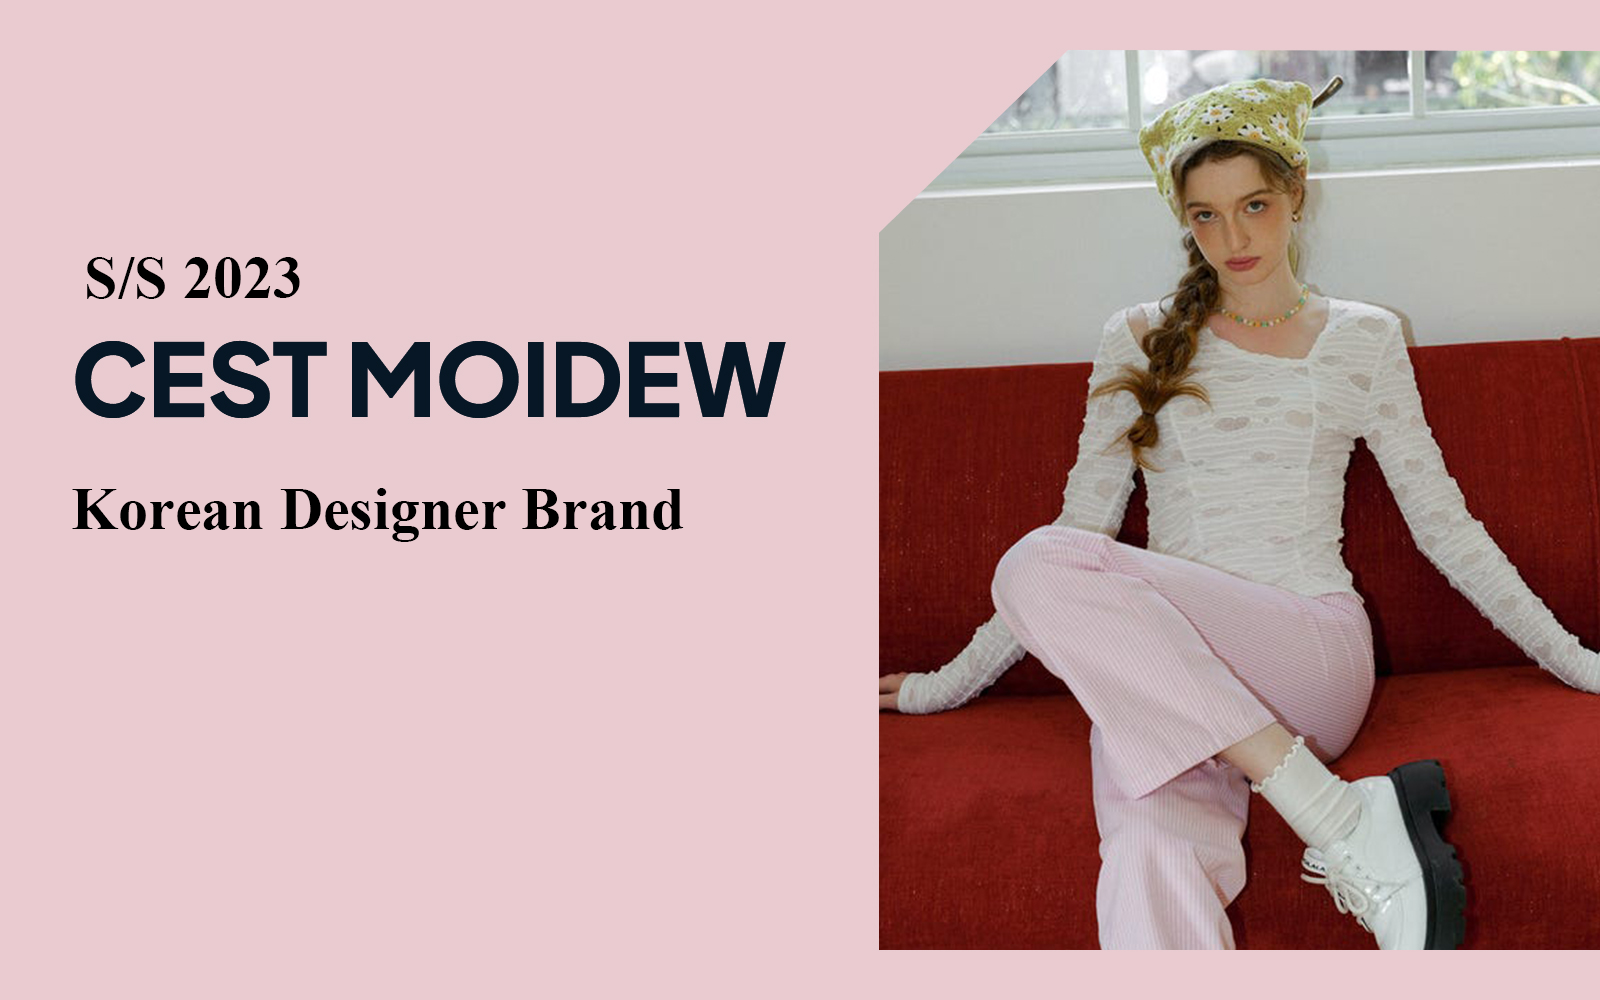 The Analysis of Cest Moidew The Womenswear Designer Brand